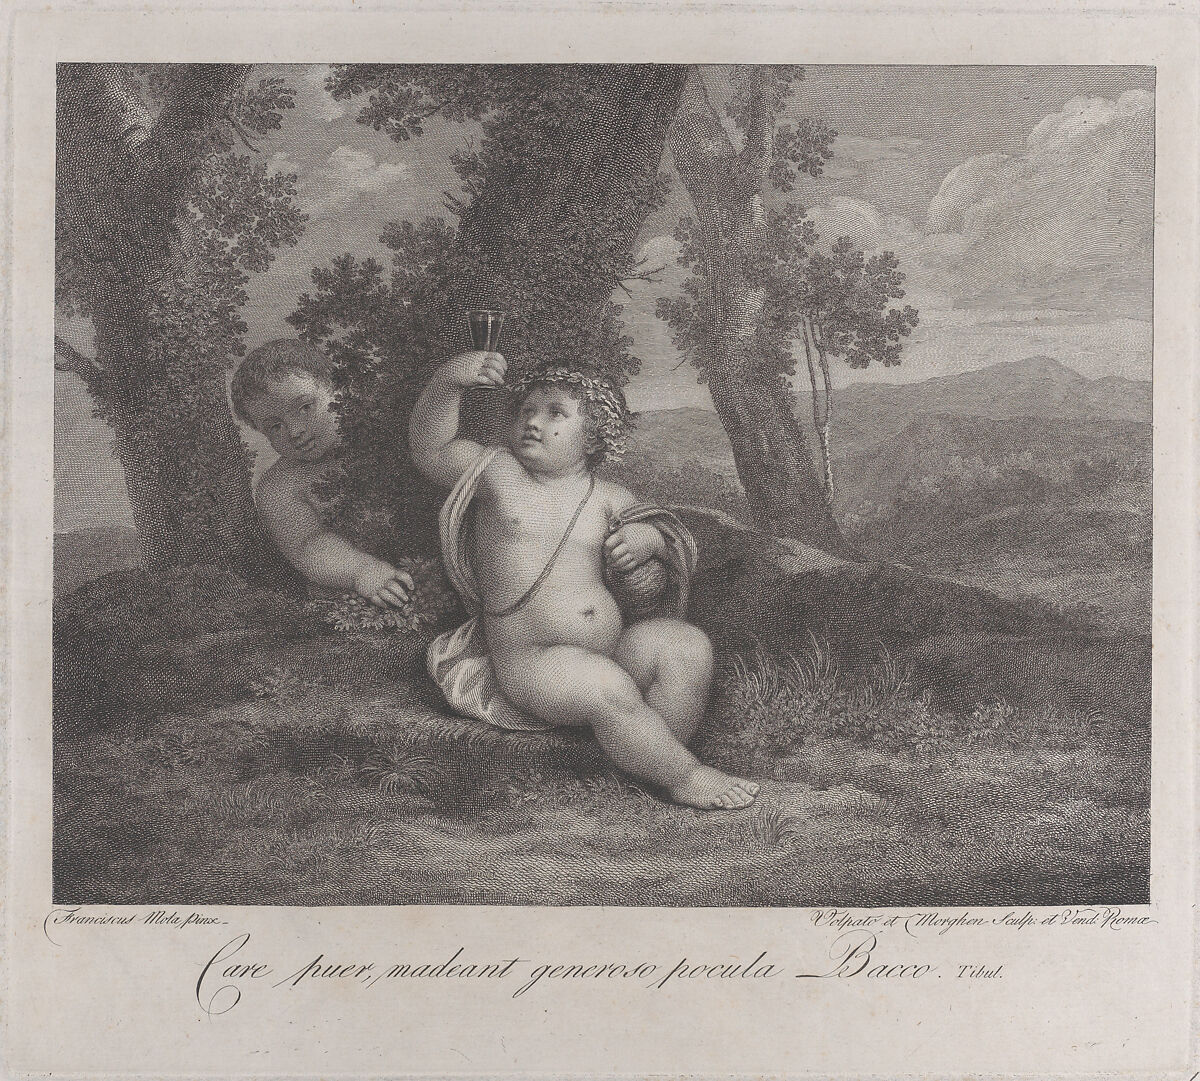 The infant Bacchus seated under a tree, holding up a wine glass, with another infant behind him at left, Raphael Morghen (Italian, Naples 1758–1833 Florence), Engraving 